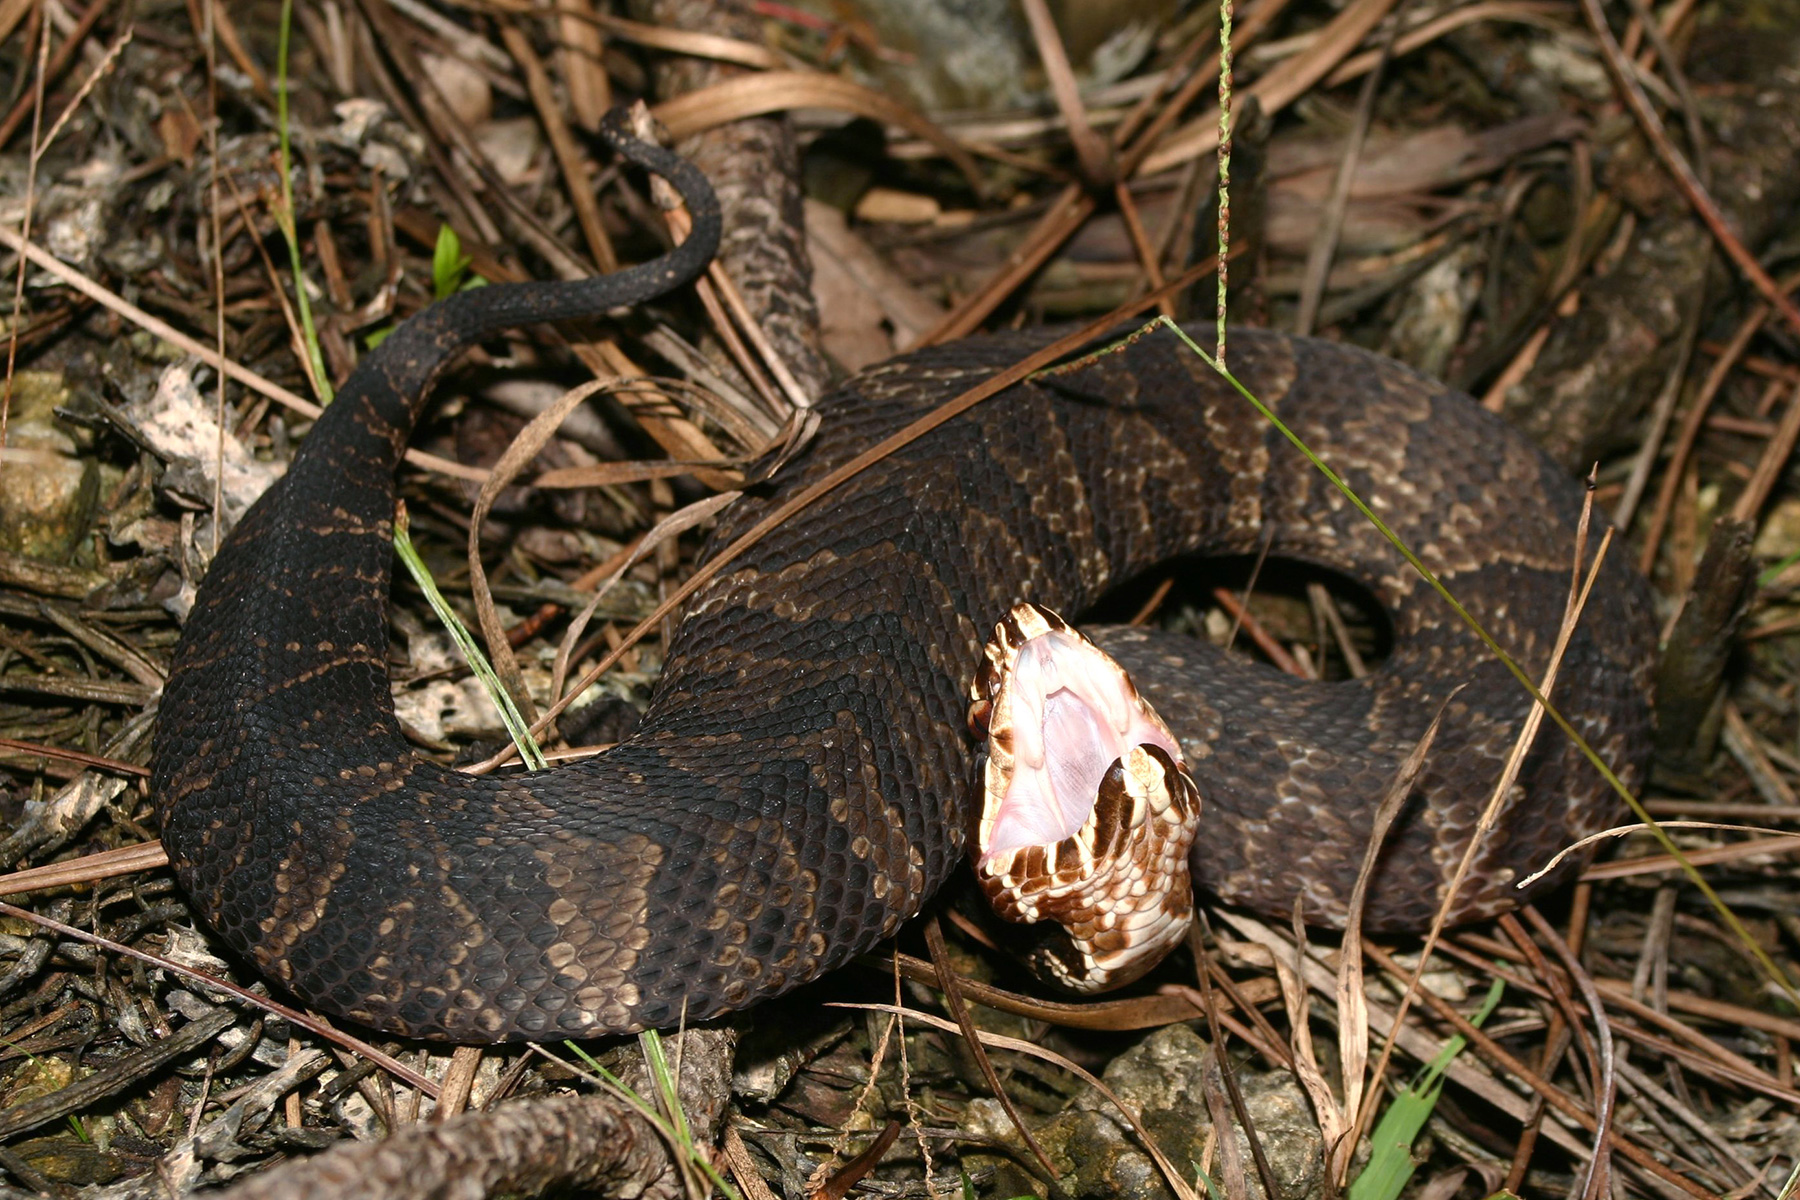 Cottonmouth Viper - Fastest Snake In The World